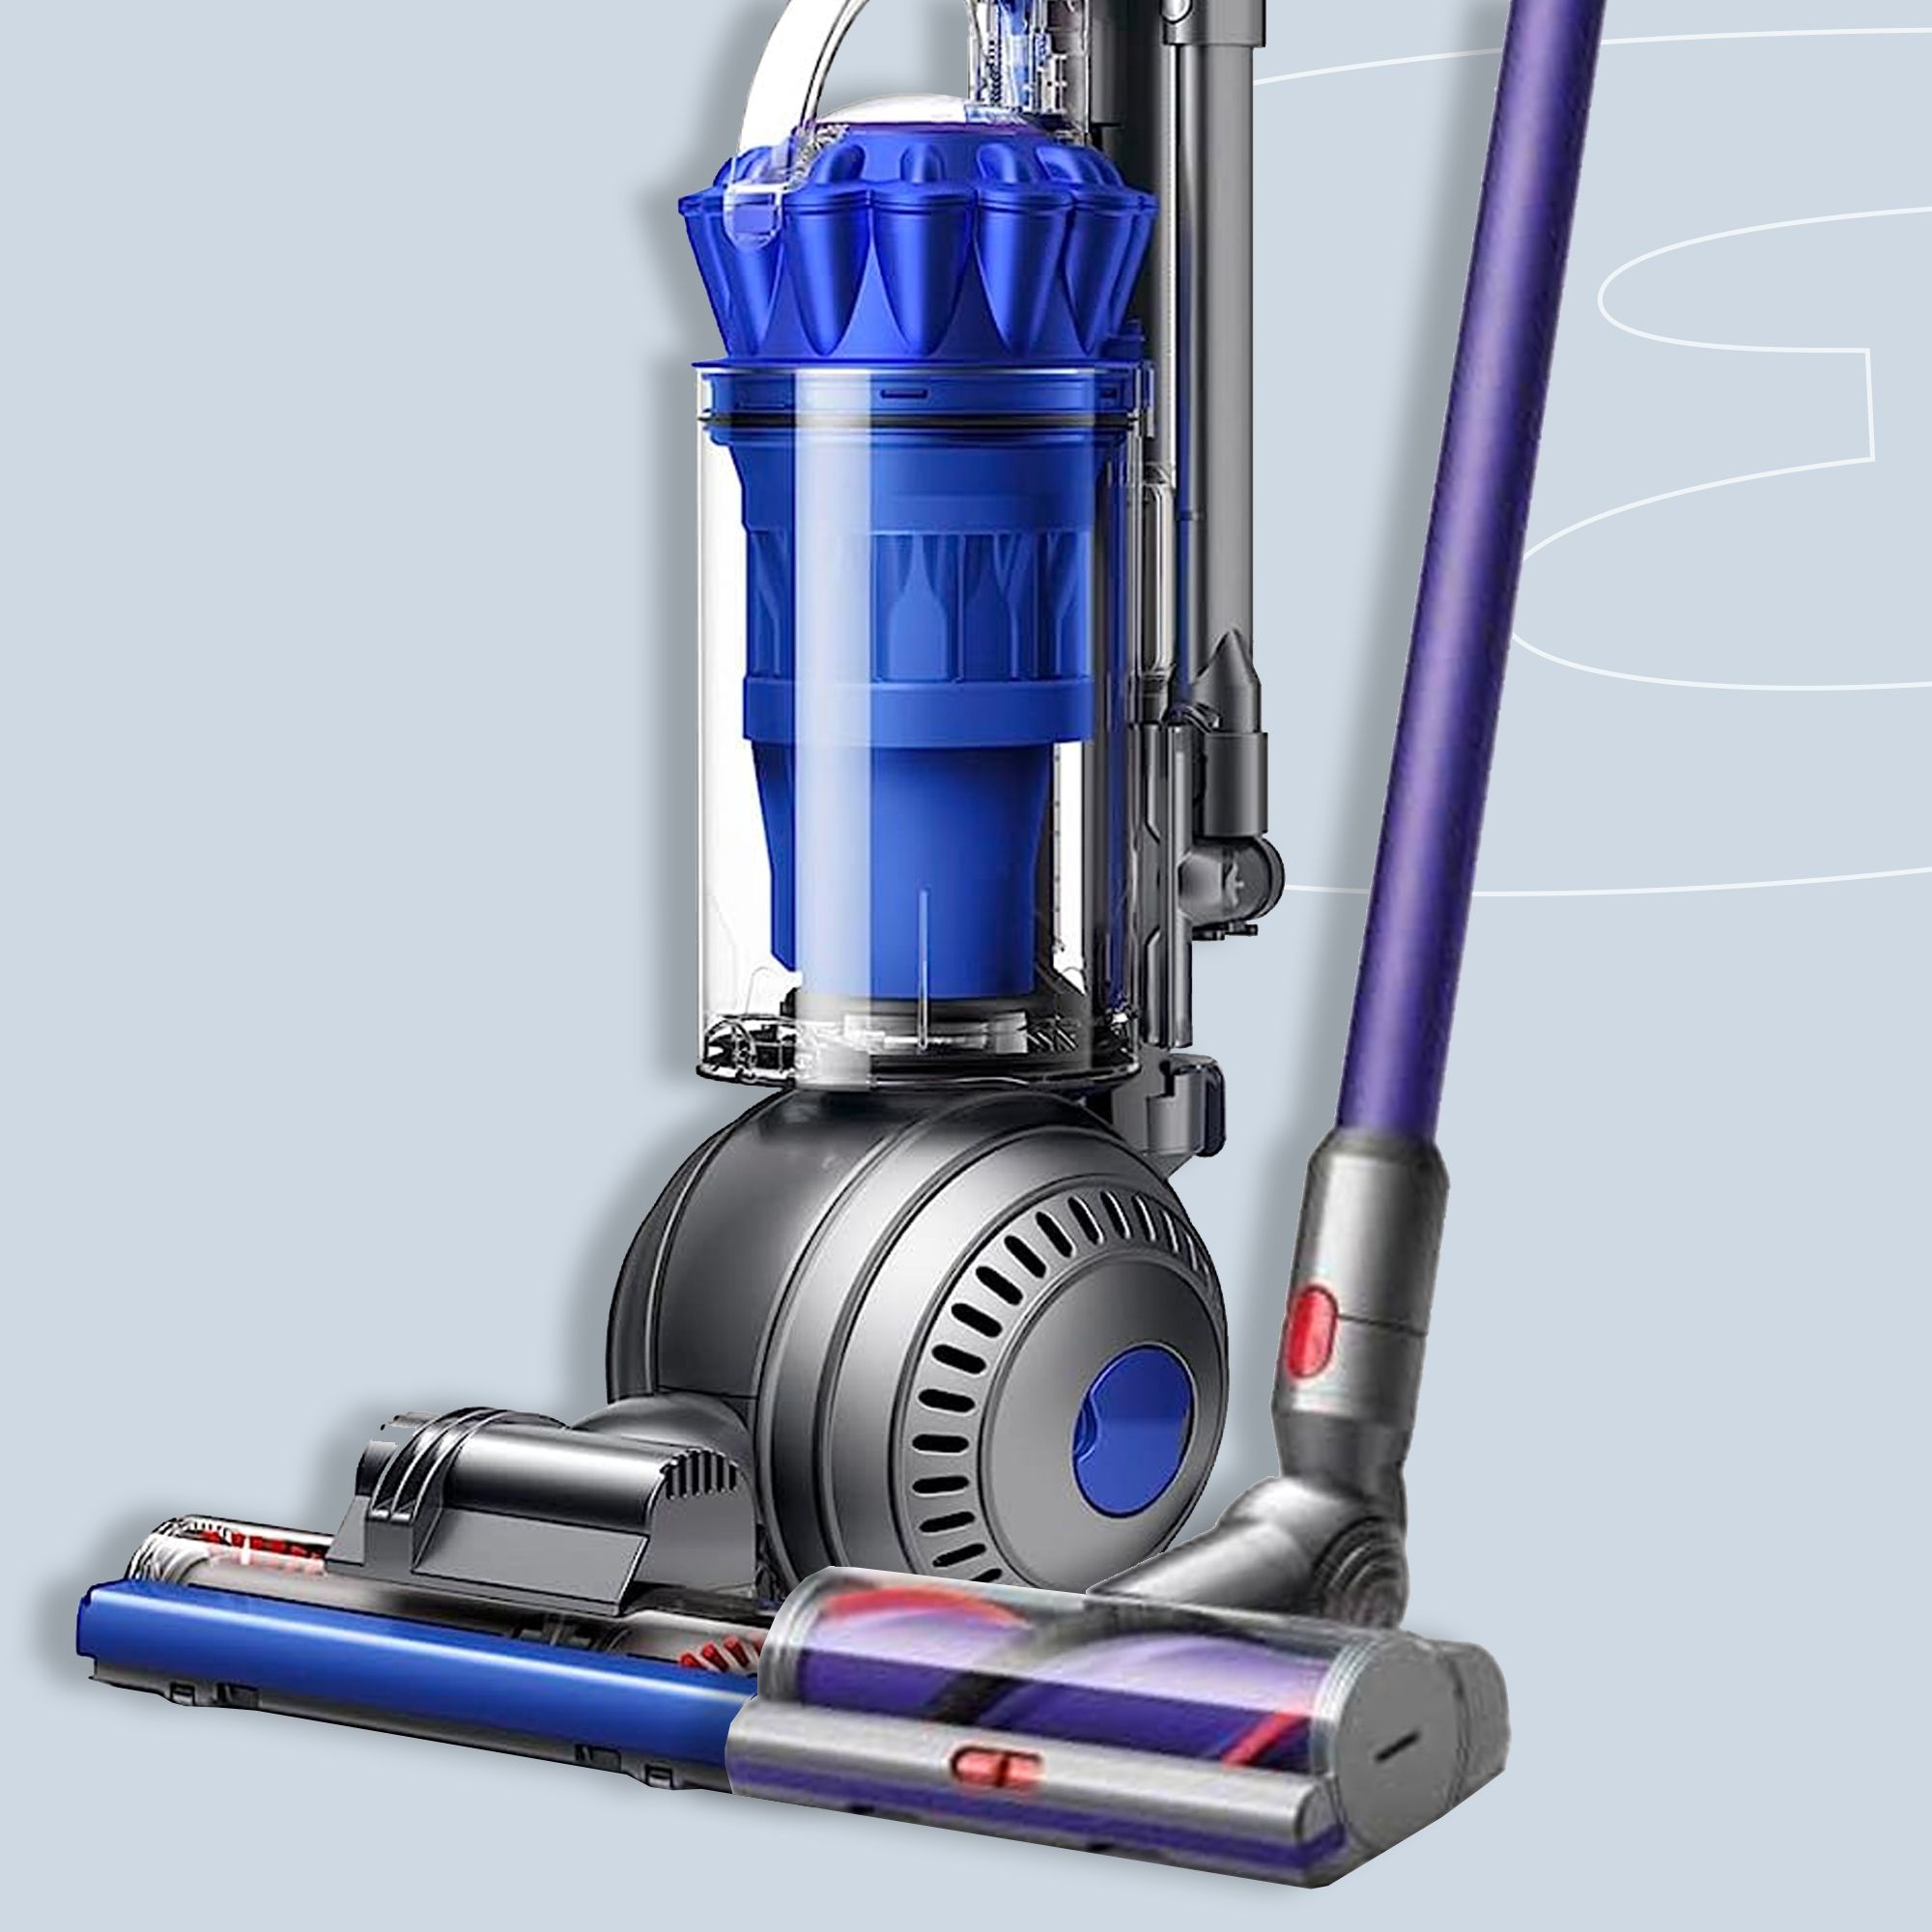 You Can Buy a Dyson Vacuum for $380 Right Now